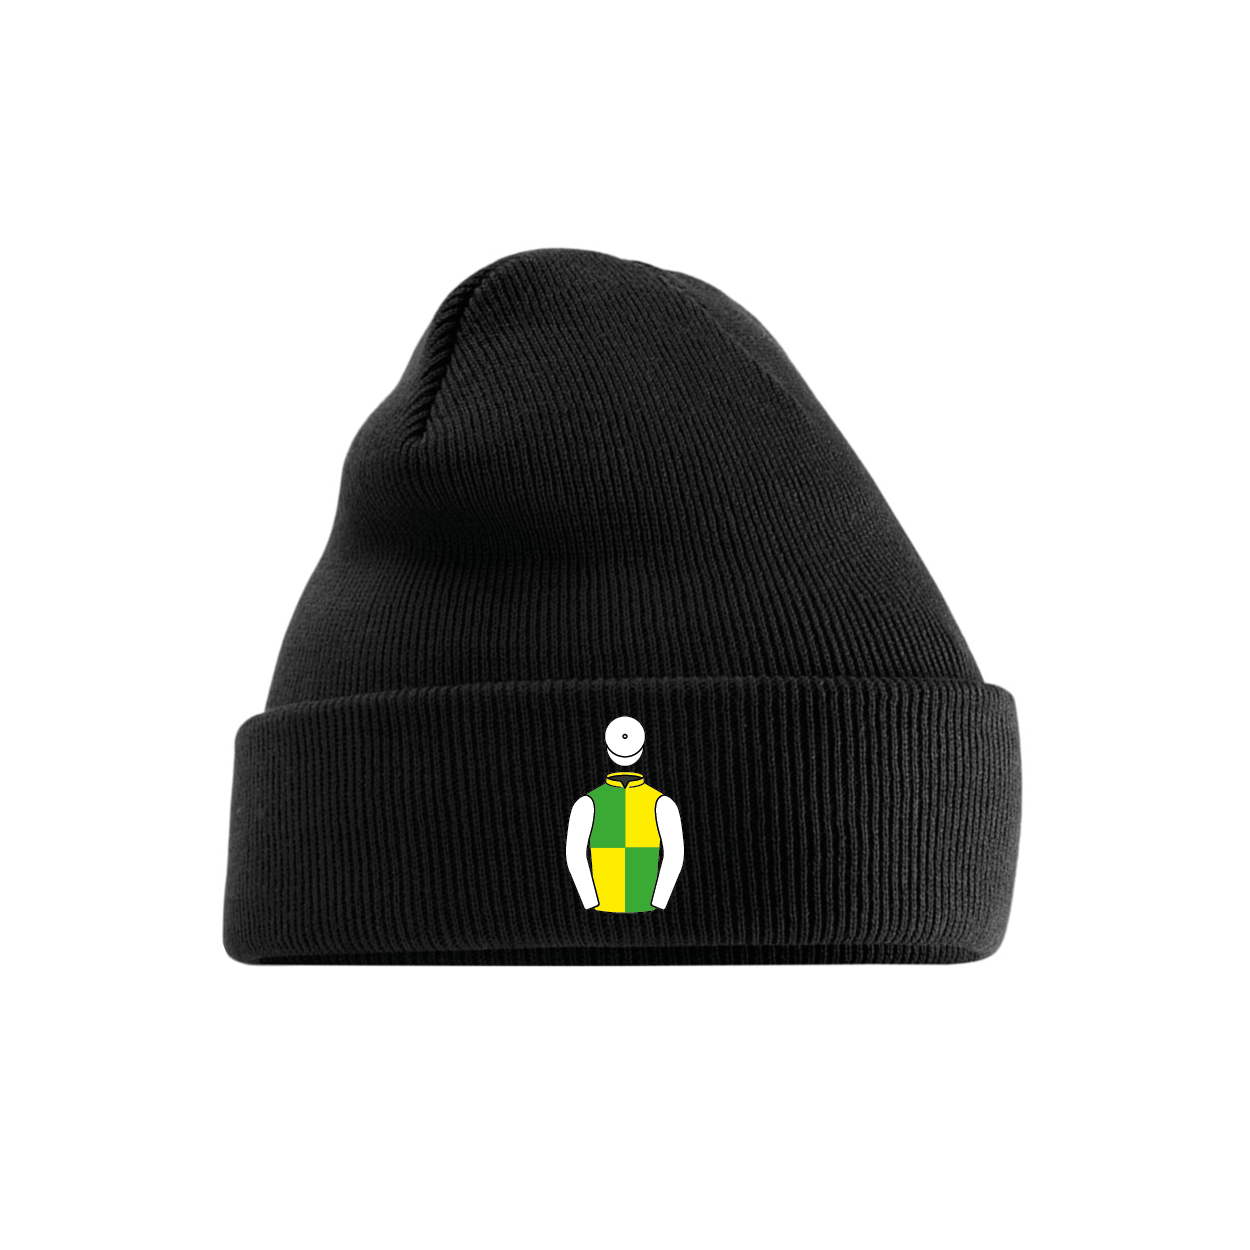 Trevor Hemmings Embroidered Cuffed Beanie - Hacked Up